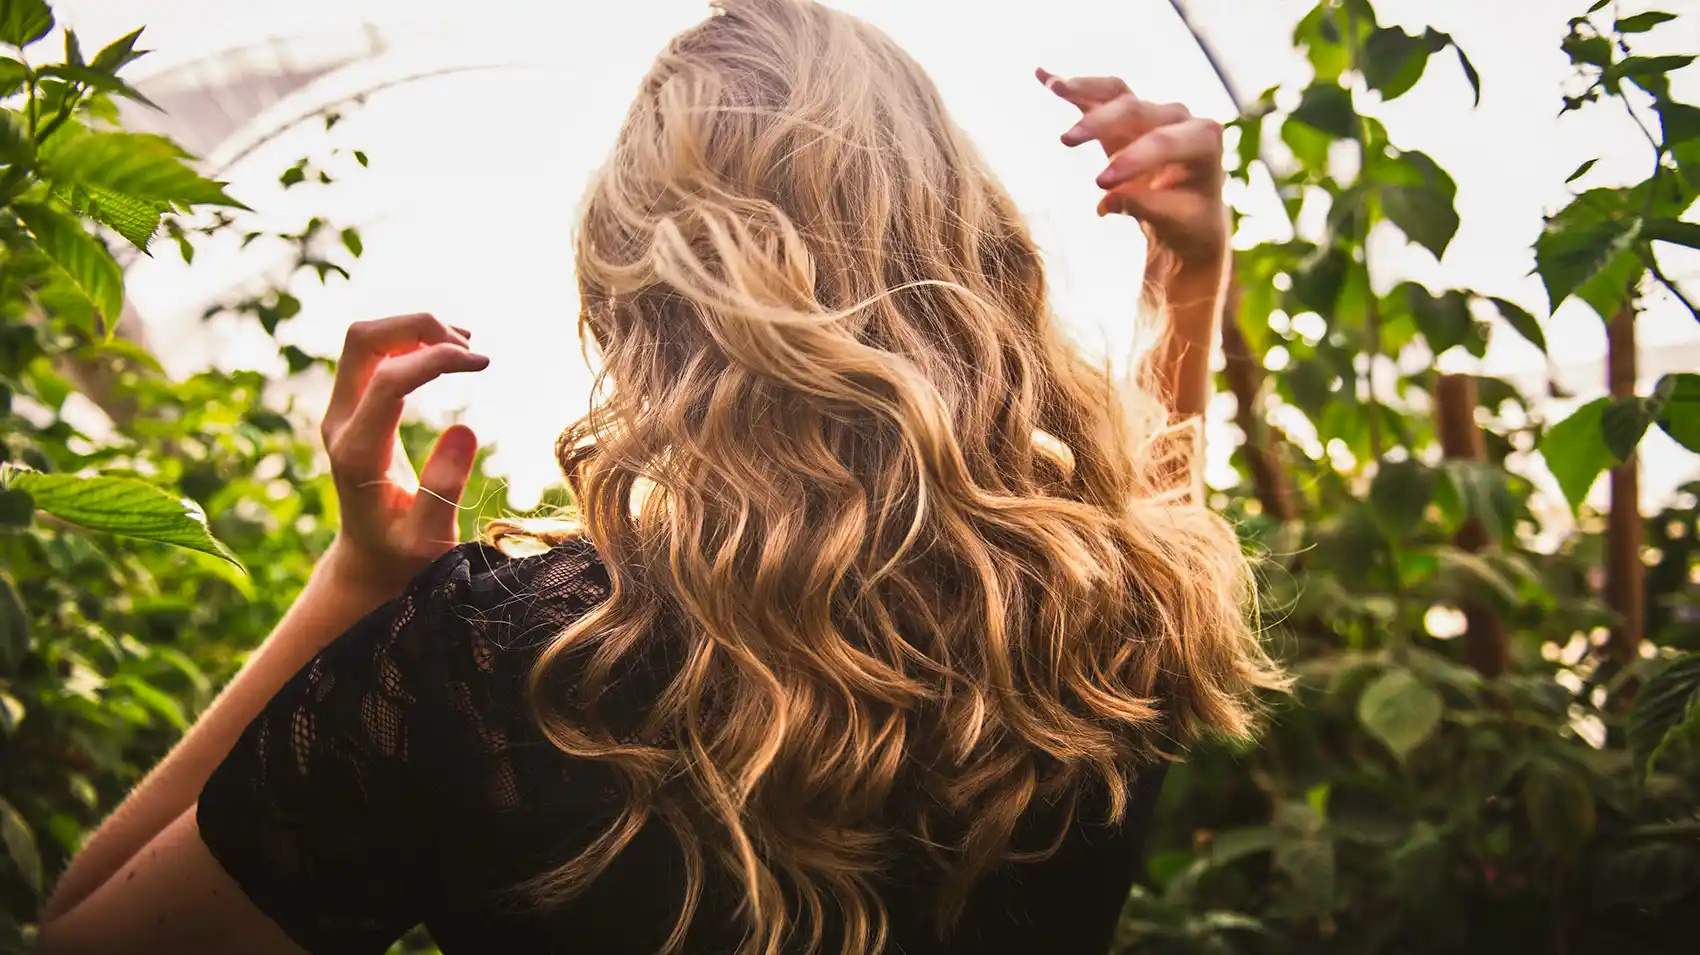 Best Vegan Shampoos & Conditioners for Hair Growth